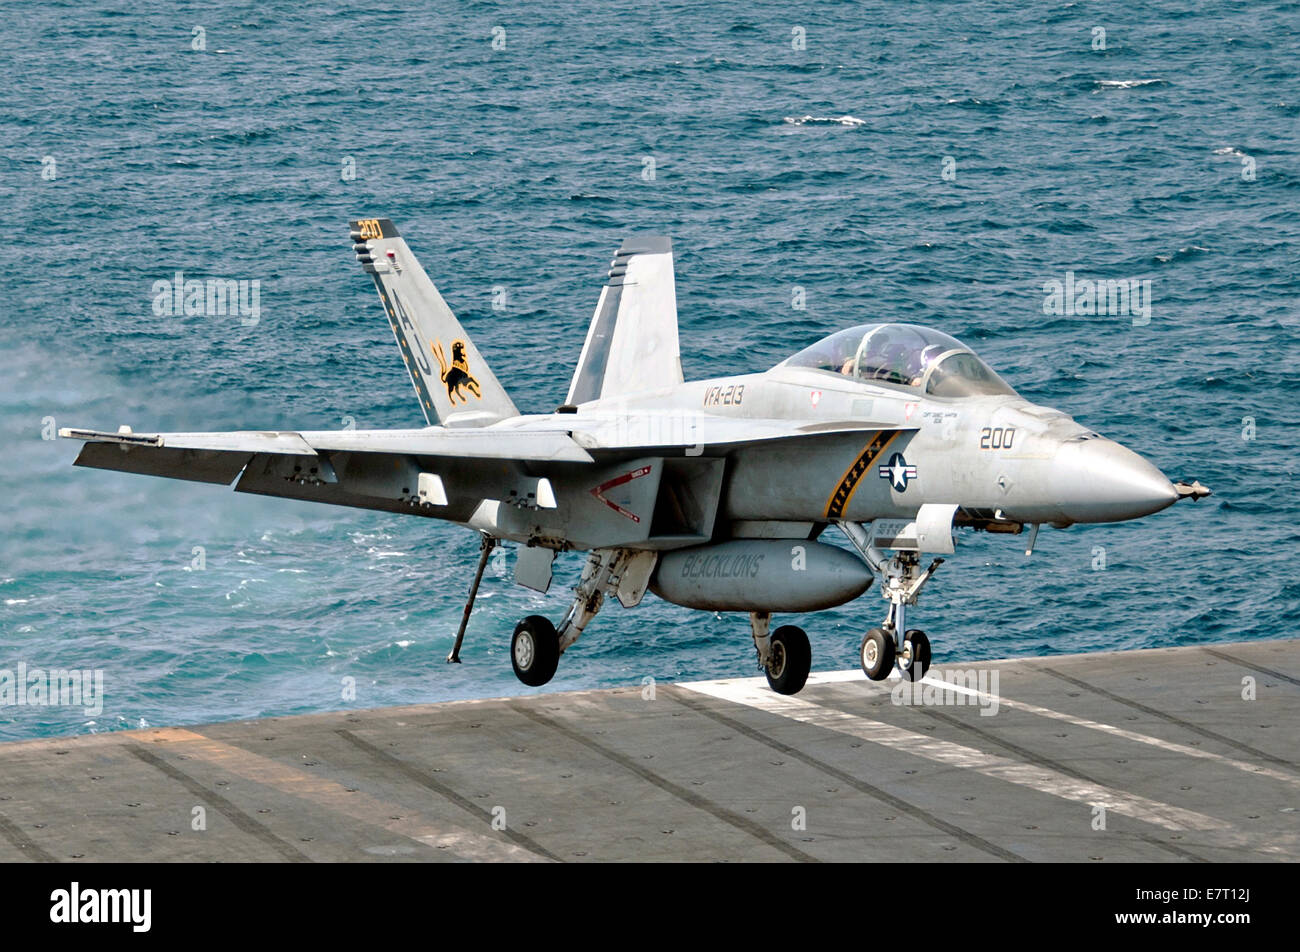 A US Navy F/A-18F Hornet fighter aircraft lands on the flight deck of the aircraft carrier USS George H.W. Bush after retiring from a combat sortie against ISIS targets September 23, 2014 in the Persian Gulf. The military launched the first direct strikes on ISIS targets inside Syria. Stock Photo